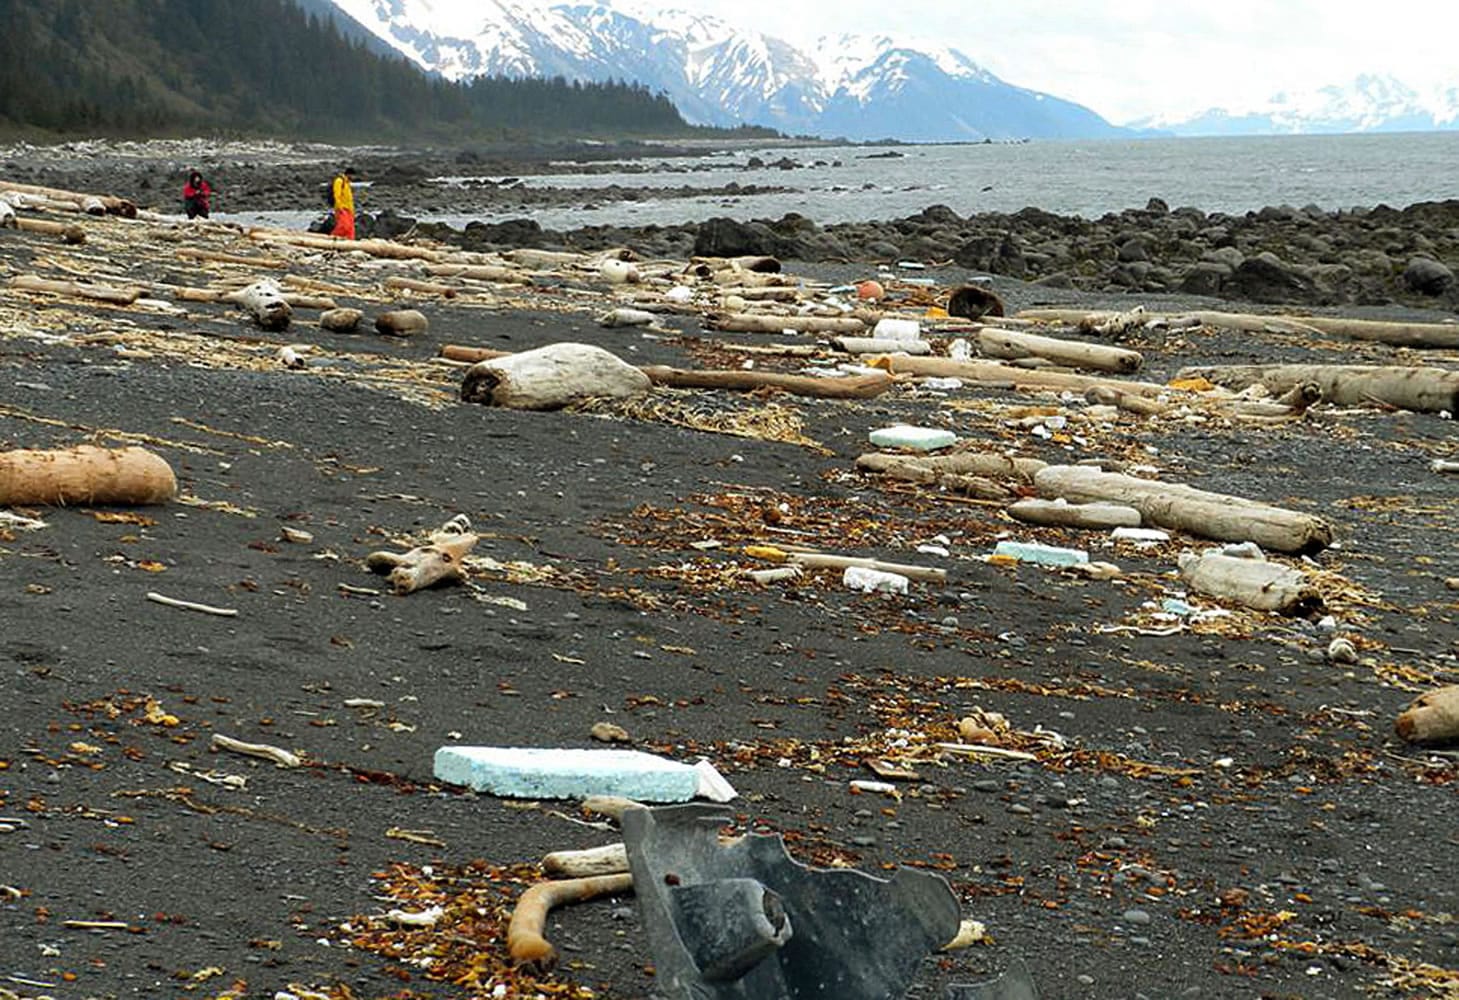 In this June 6, 2012 photo provided by Chris Pallister, debris is strewn across the shore of Montague Island near Seward, Alaska. More than a year after a tsunami devastated Japan, killing thousands of people and washing millions of tons of debris into the Pacific Ocean, neither the U.S. government nor some West Coast states have a clear plan for how to clean up the rubble that floats to American shores.